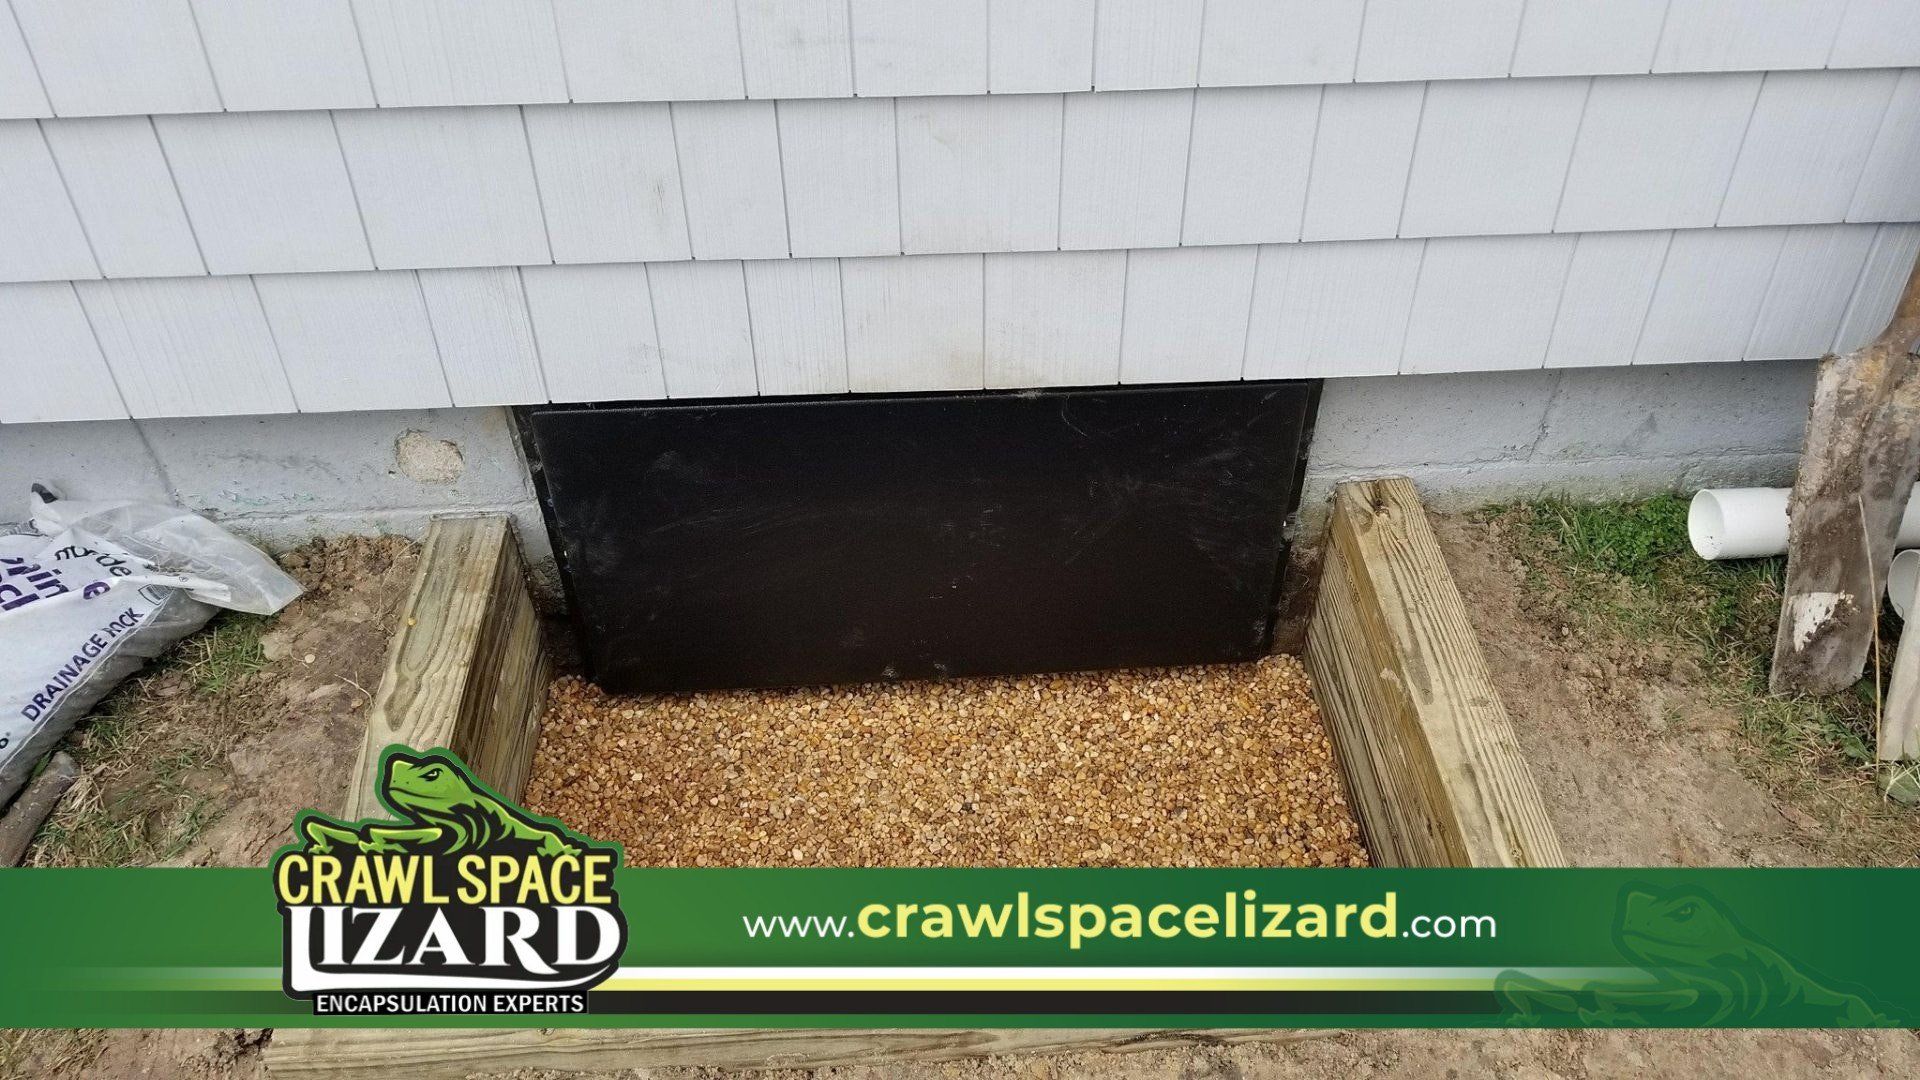 Crawl Space Wells, Doors, Vent Installation in Roswell, GA